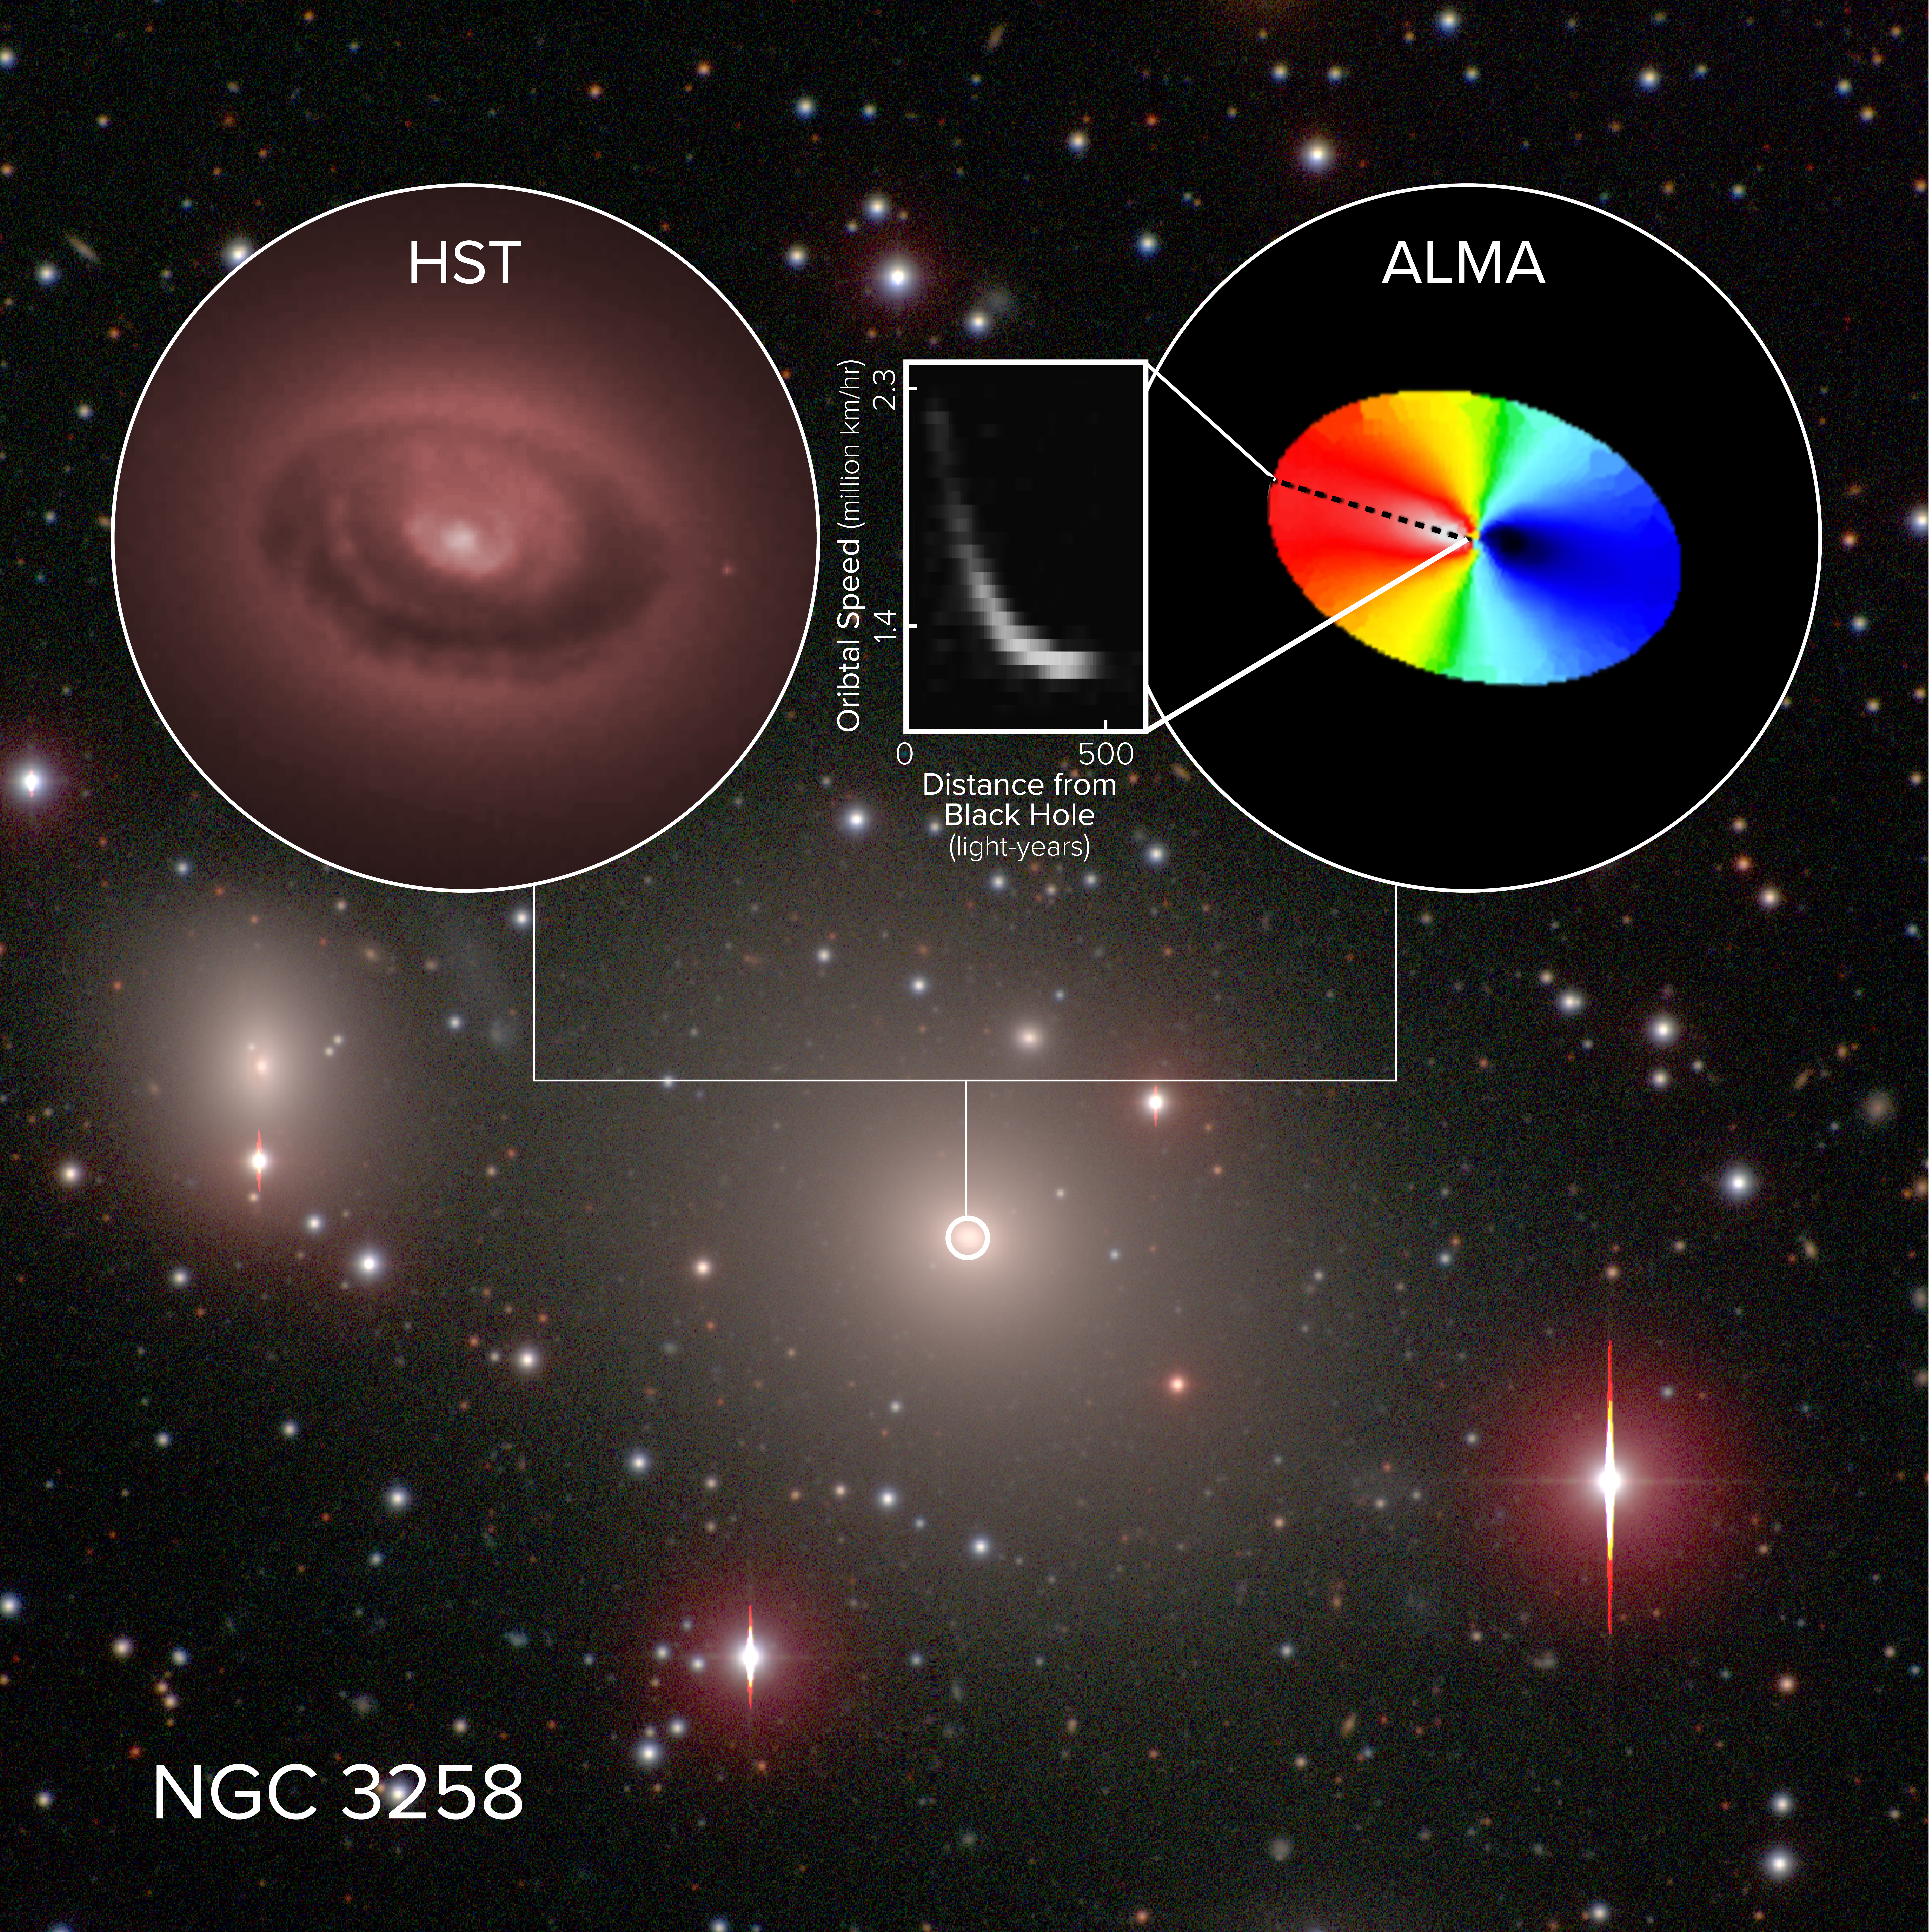 <p>ALMA has made the most precise measurements of cold gas swirling around a supermassive black hole -- the cosmic behemoth at the center of the giant elliptical galaxy NGC 3258. The multi-color ellipse reflects the motion of the gas orbiting the black hole, with blue indicating motion towards us and red motion away from us. The inset box represents how the orbital velocity changes with distance from theblack hole. The material was found to rotate faster the closer in the astronomers observed to the black hole, enabling them to accurately calculate its mass: a whopping 2.25 billion times the mass of our sun. Credit: ALMA (ESO/NAOJ/NRAO), B. Boizelle; NRAO/AUI/NSF, S. Dagnello; Hubble Space Telescope (NASA/ESA); Carnegie-Irvine Galaxy Survey</p>
